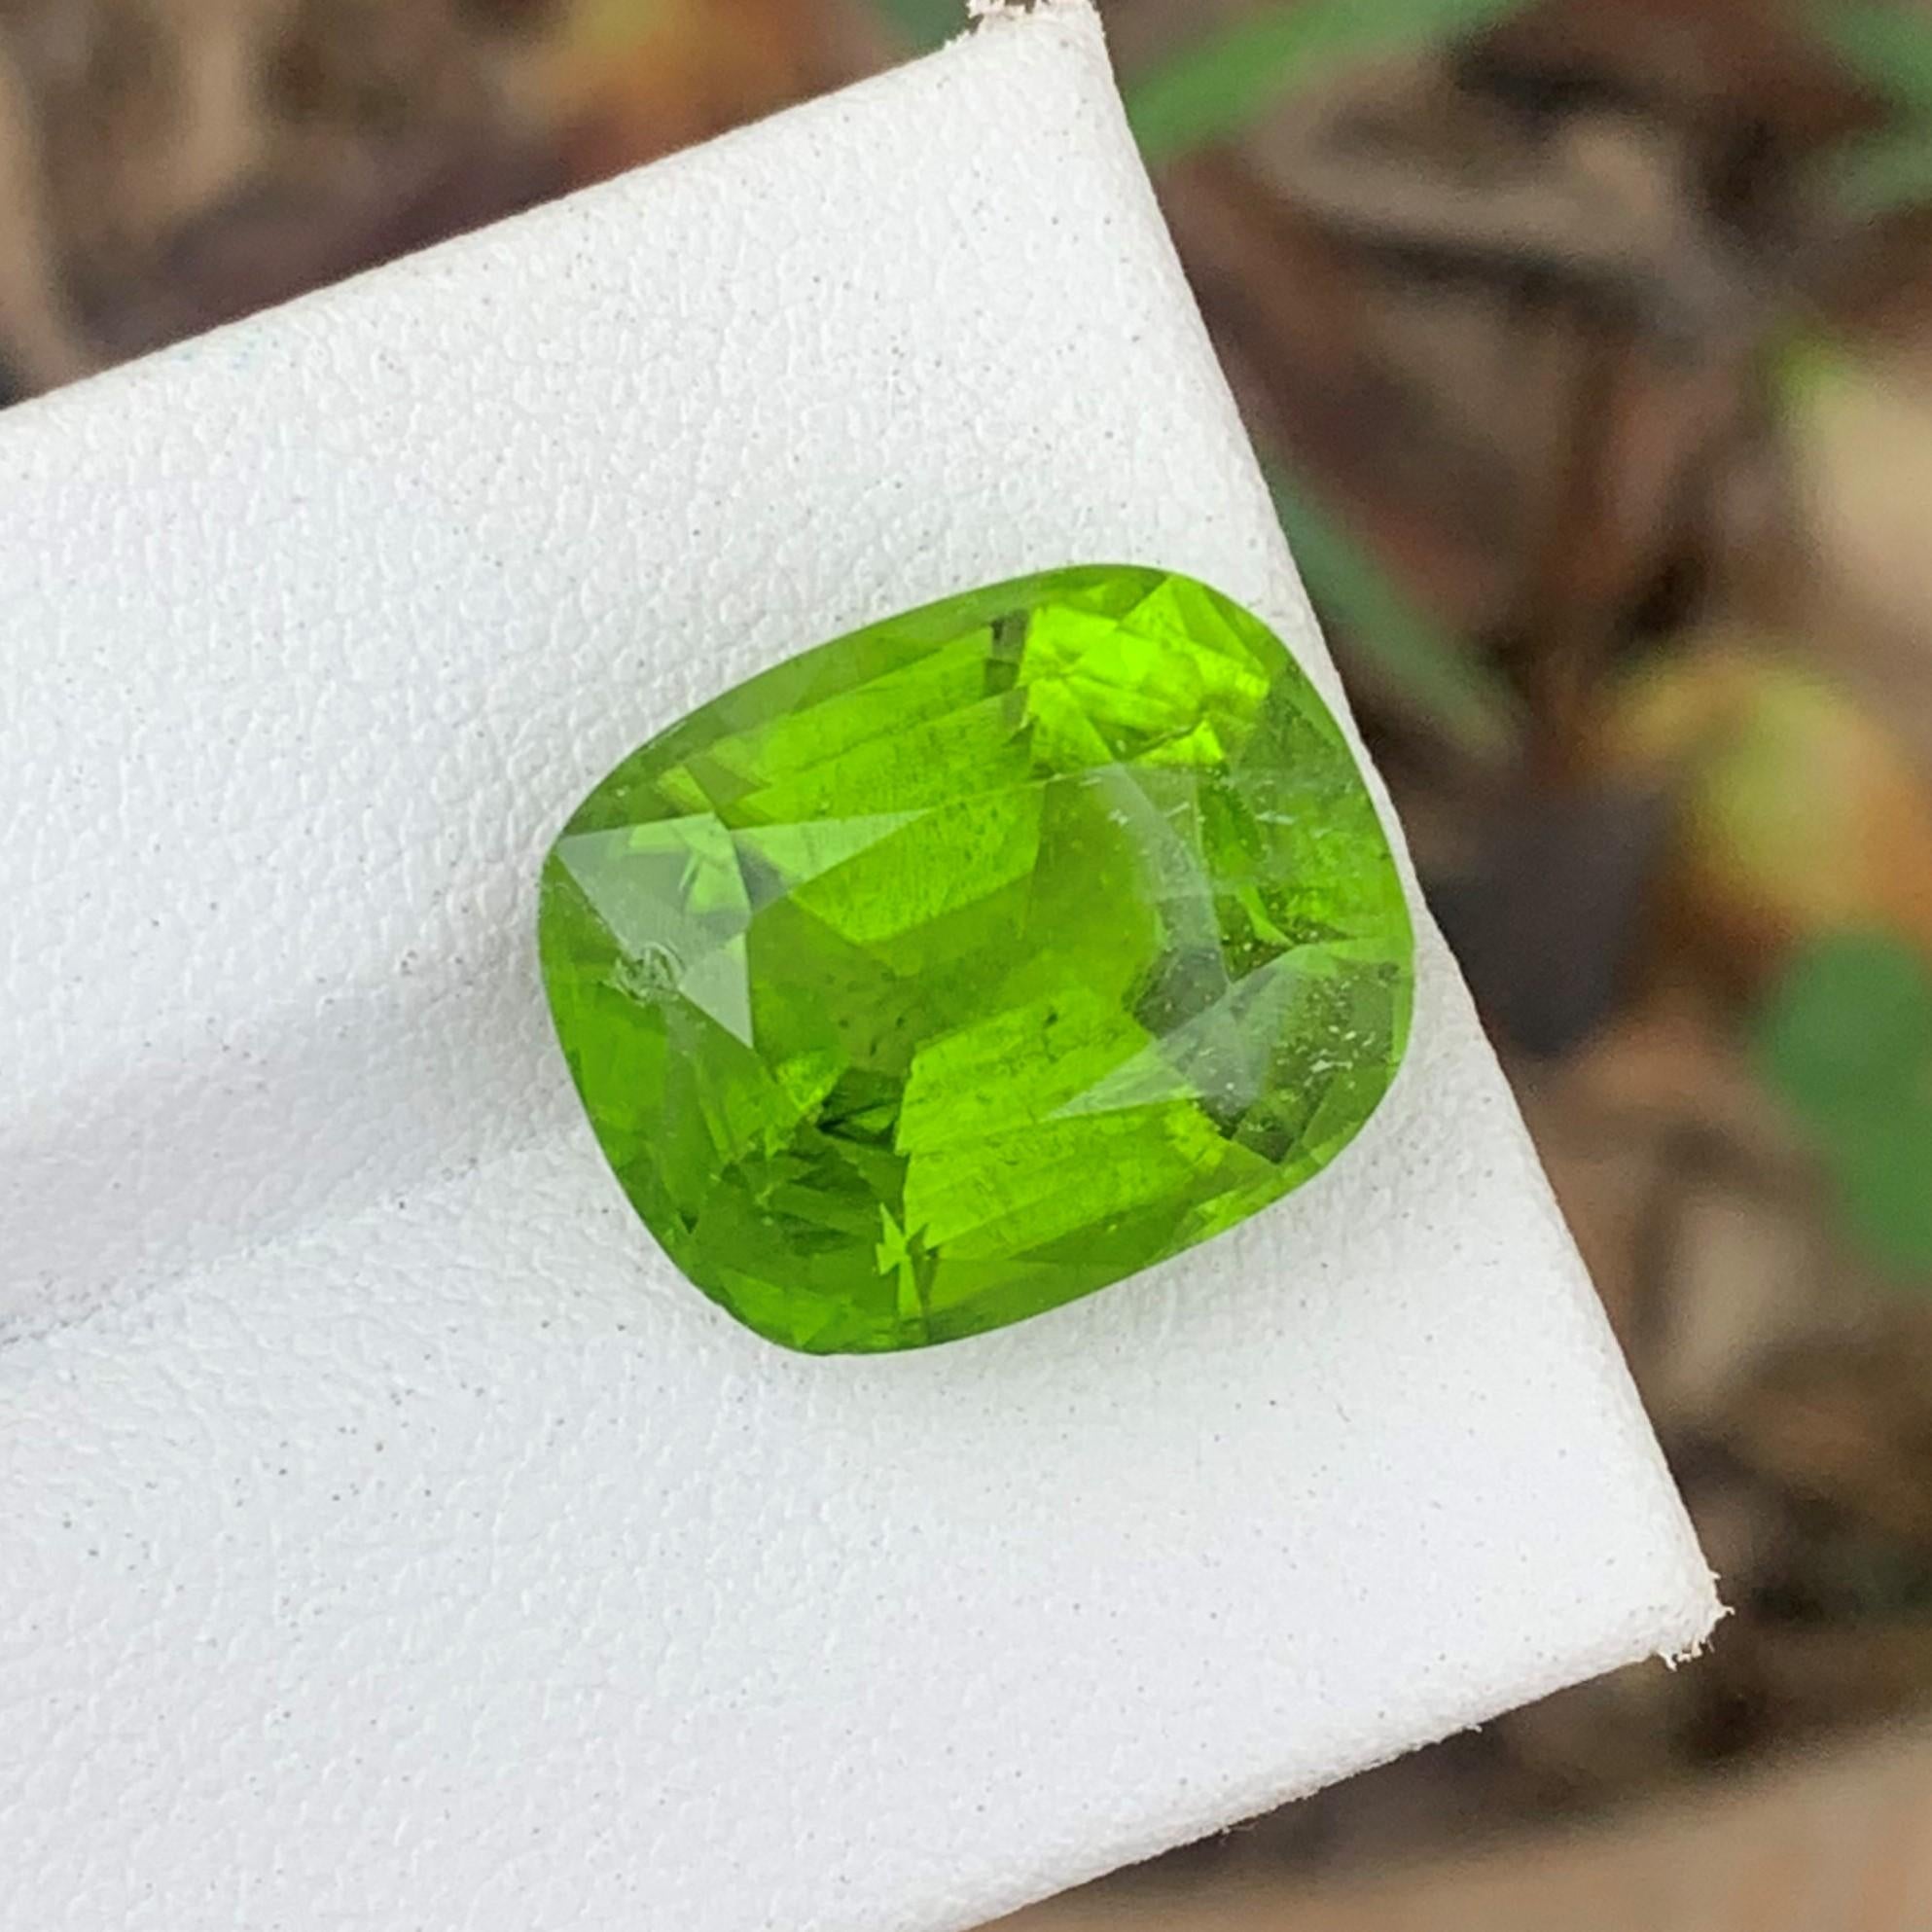 Gemstone Type : Peridot
Weight : 12.75 Carats
Dimensions : 15.2x12.7x8.7 mm
Origin : Suppat Valley Pakistan
Clarity : SI
Certificate: On Demand
Color: Green
It helps cure diseases related to lungs, breasts, intestinal tract, spleen and lymph. It is